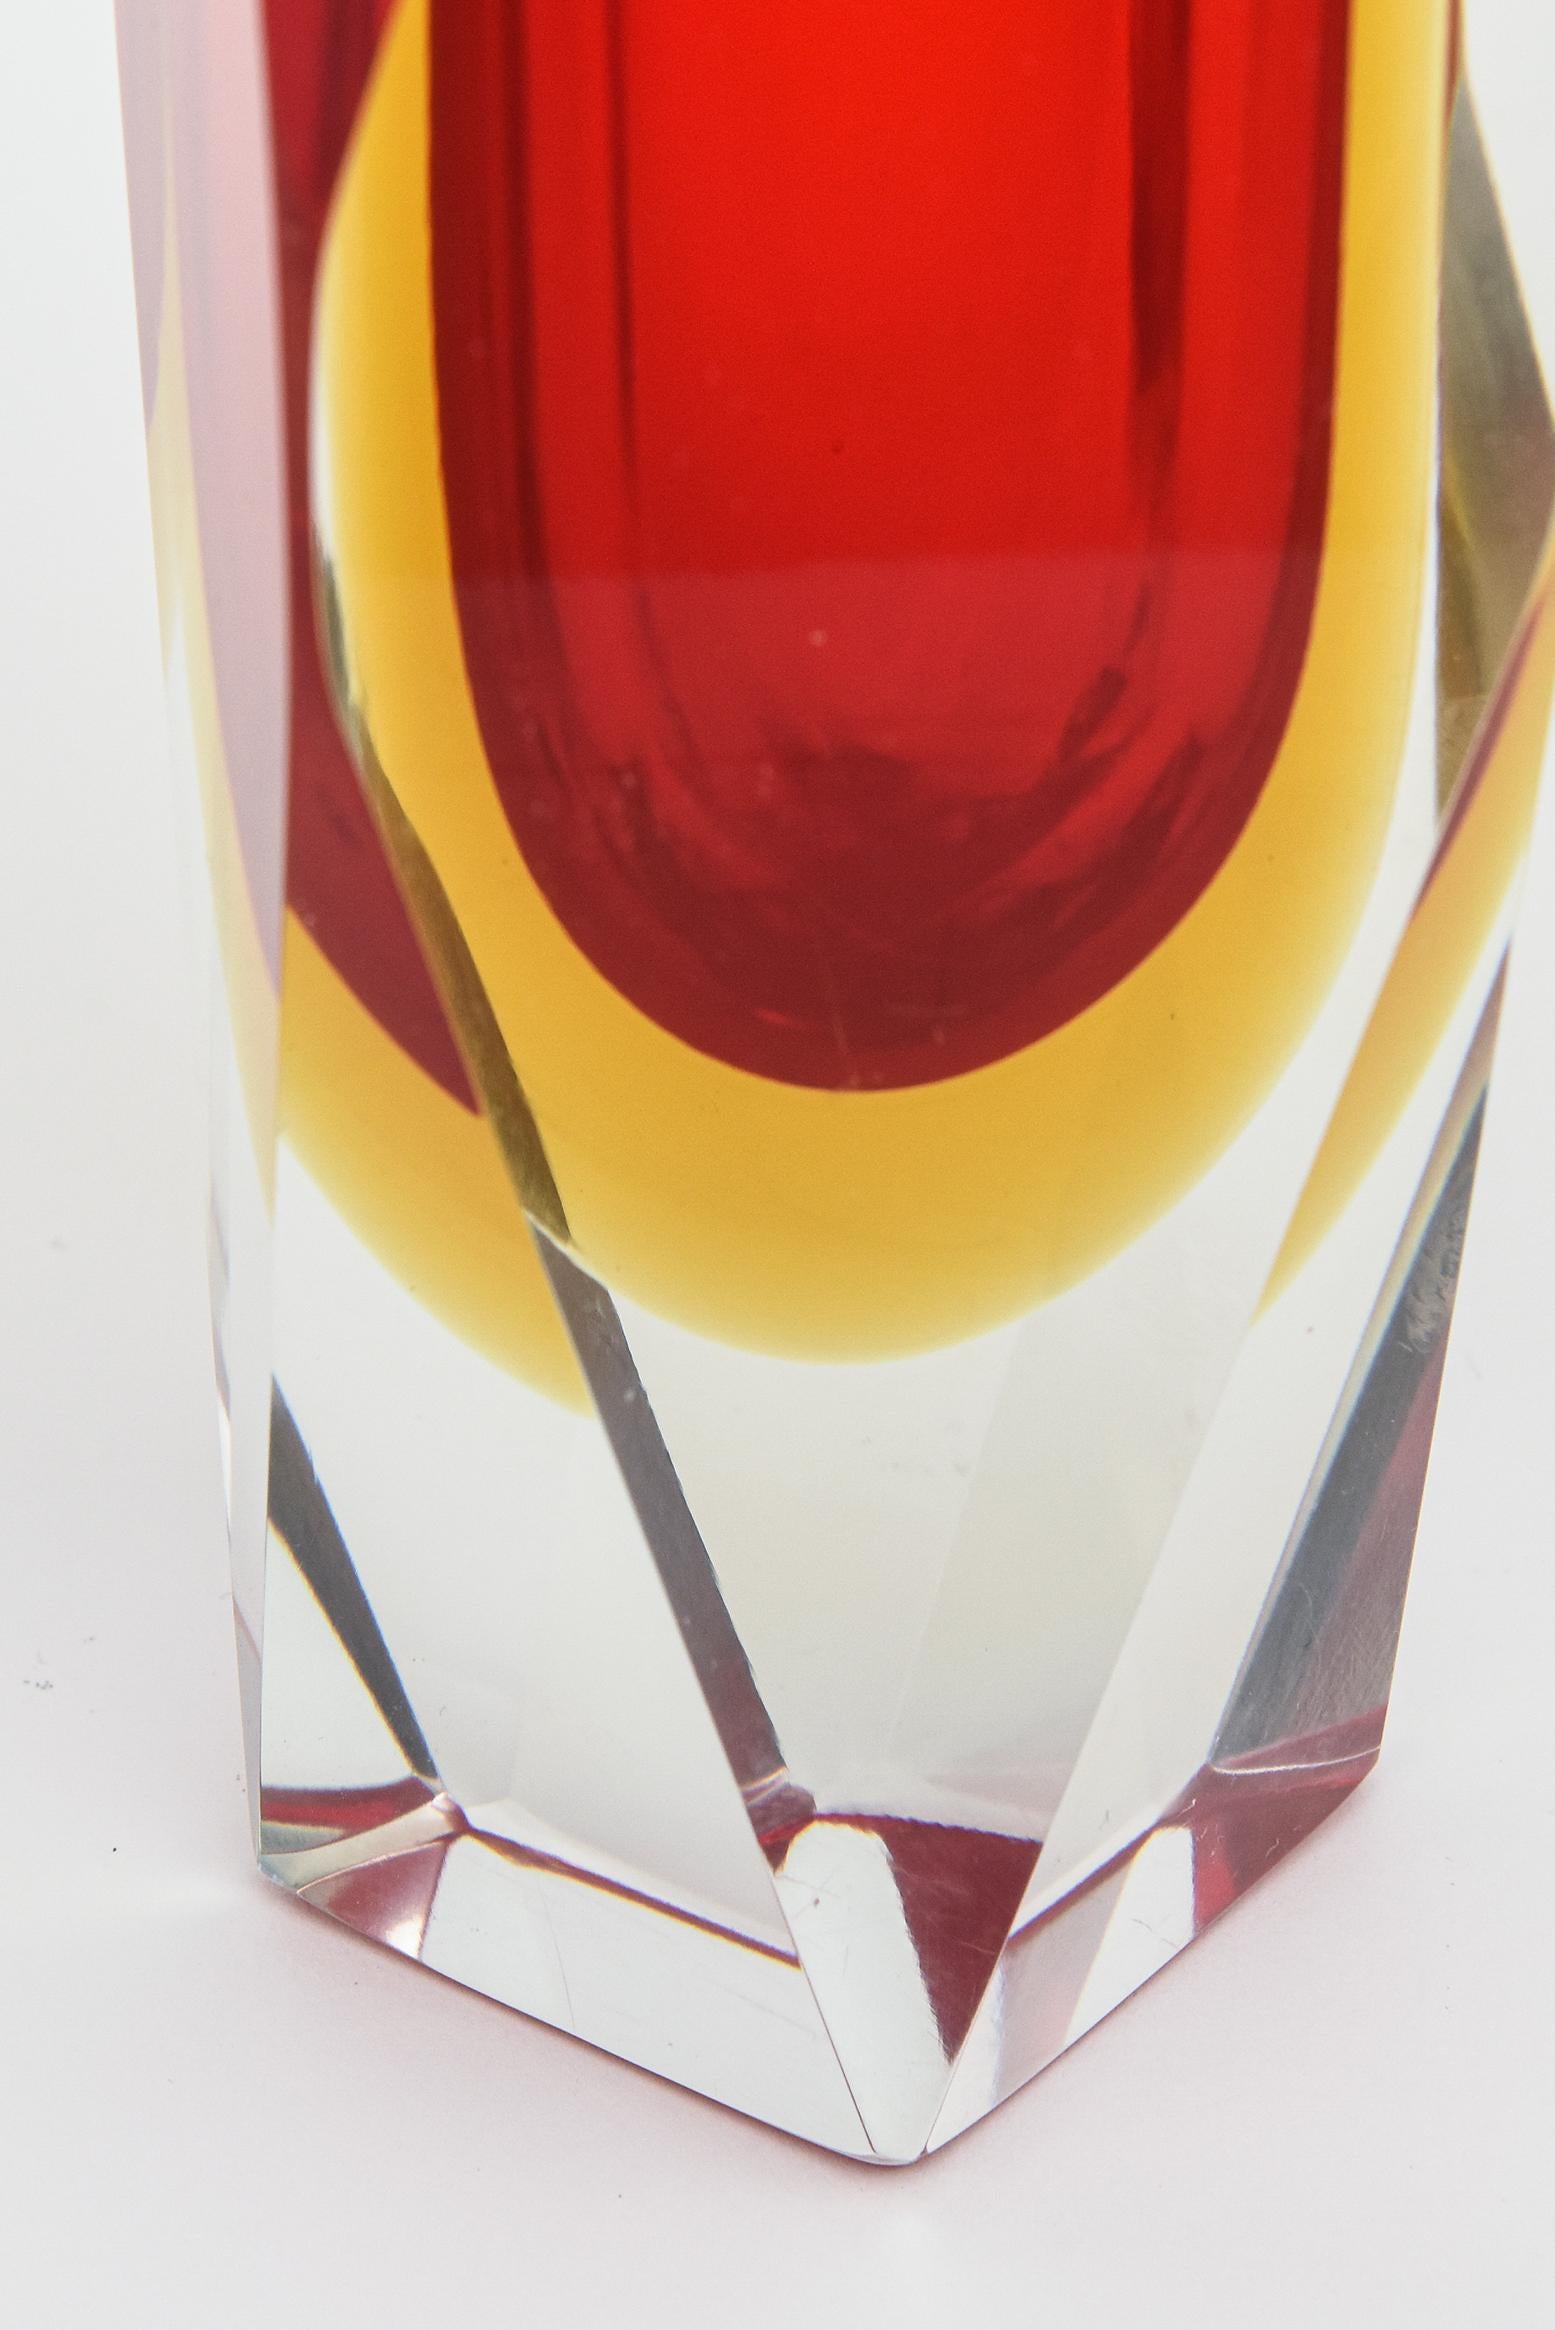 Mandruzzato Vintage Murano Red and Yellow Sommerso Faceted Glass Vase Italian For Sale 2